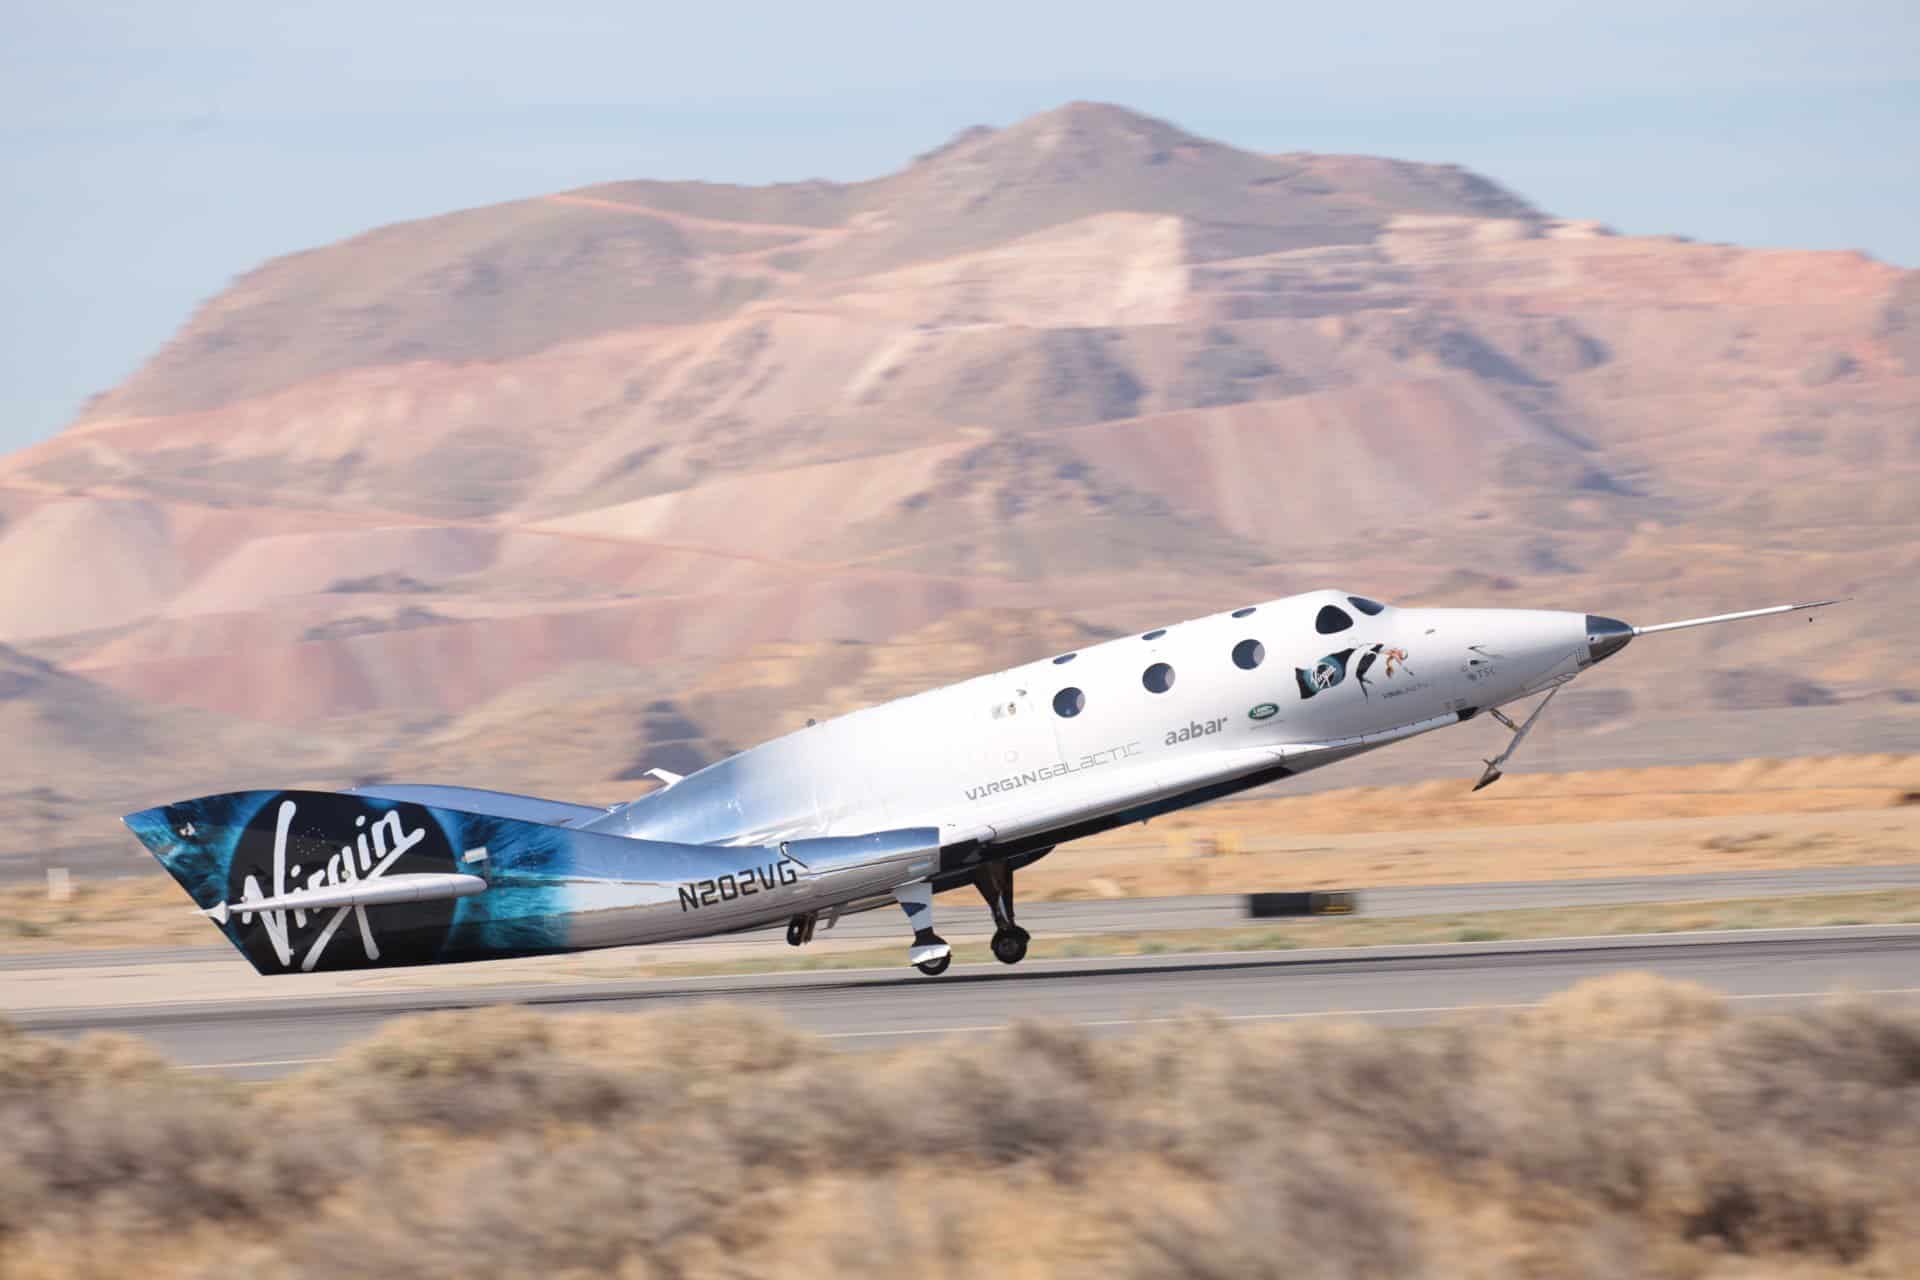 virgin galactic lays off 18% of its workforce and pauses flights